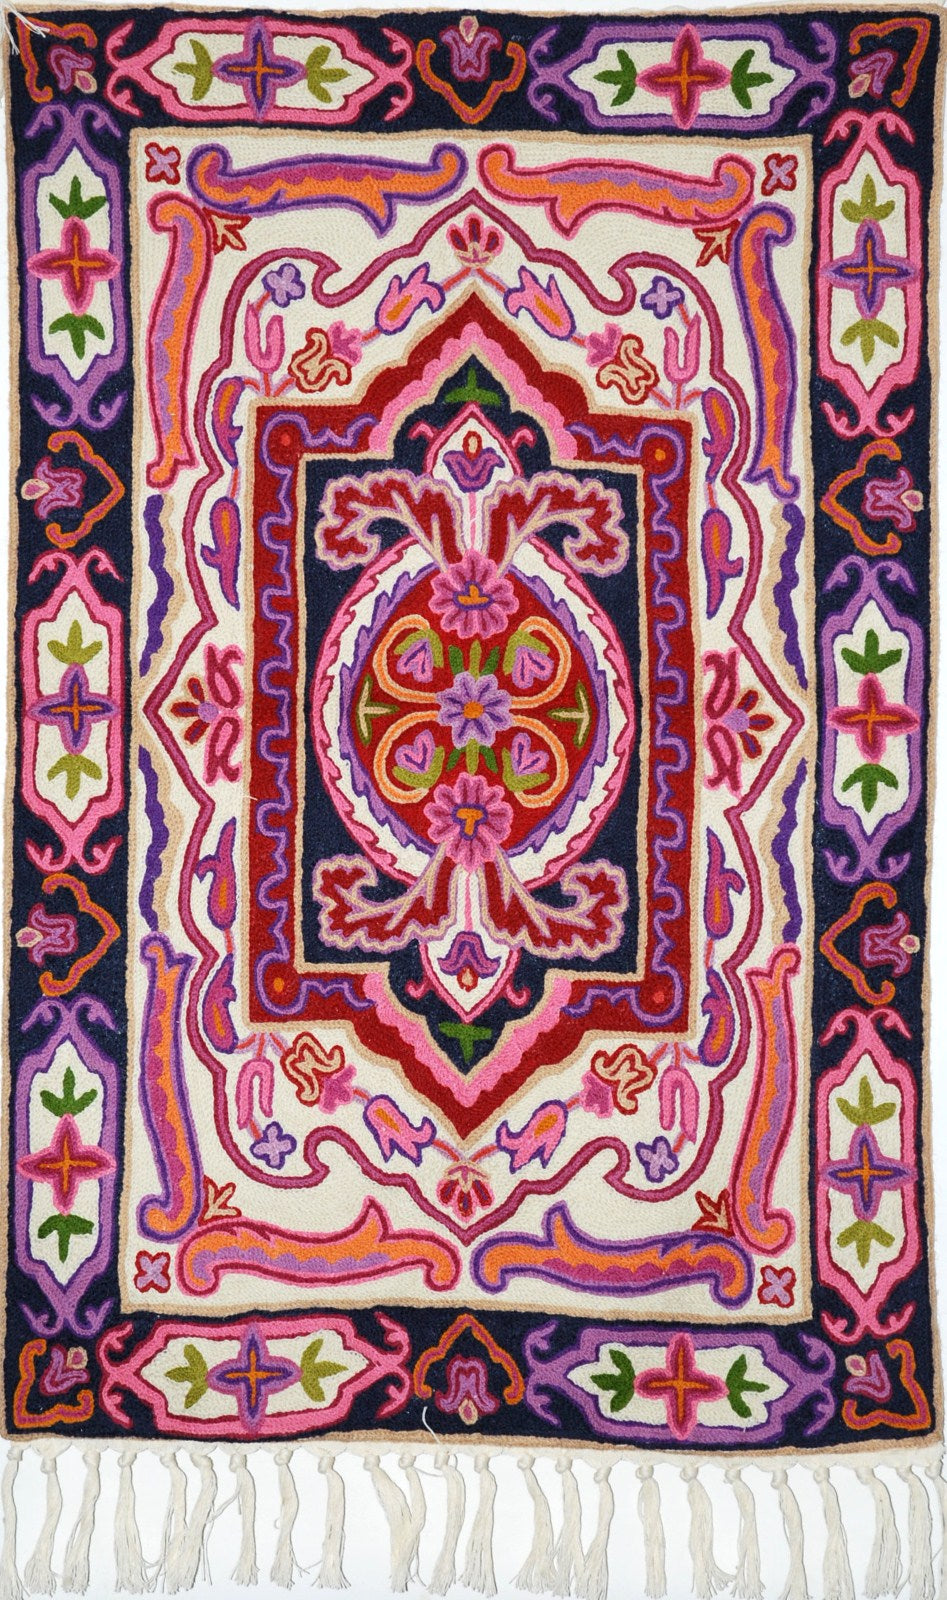 ChainStitch Tapestry Wall Hanging Area Rug, Multicolor Embroidery 2x3 feet #CWR6117